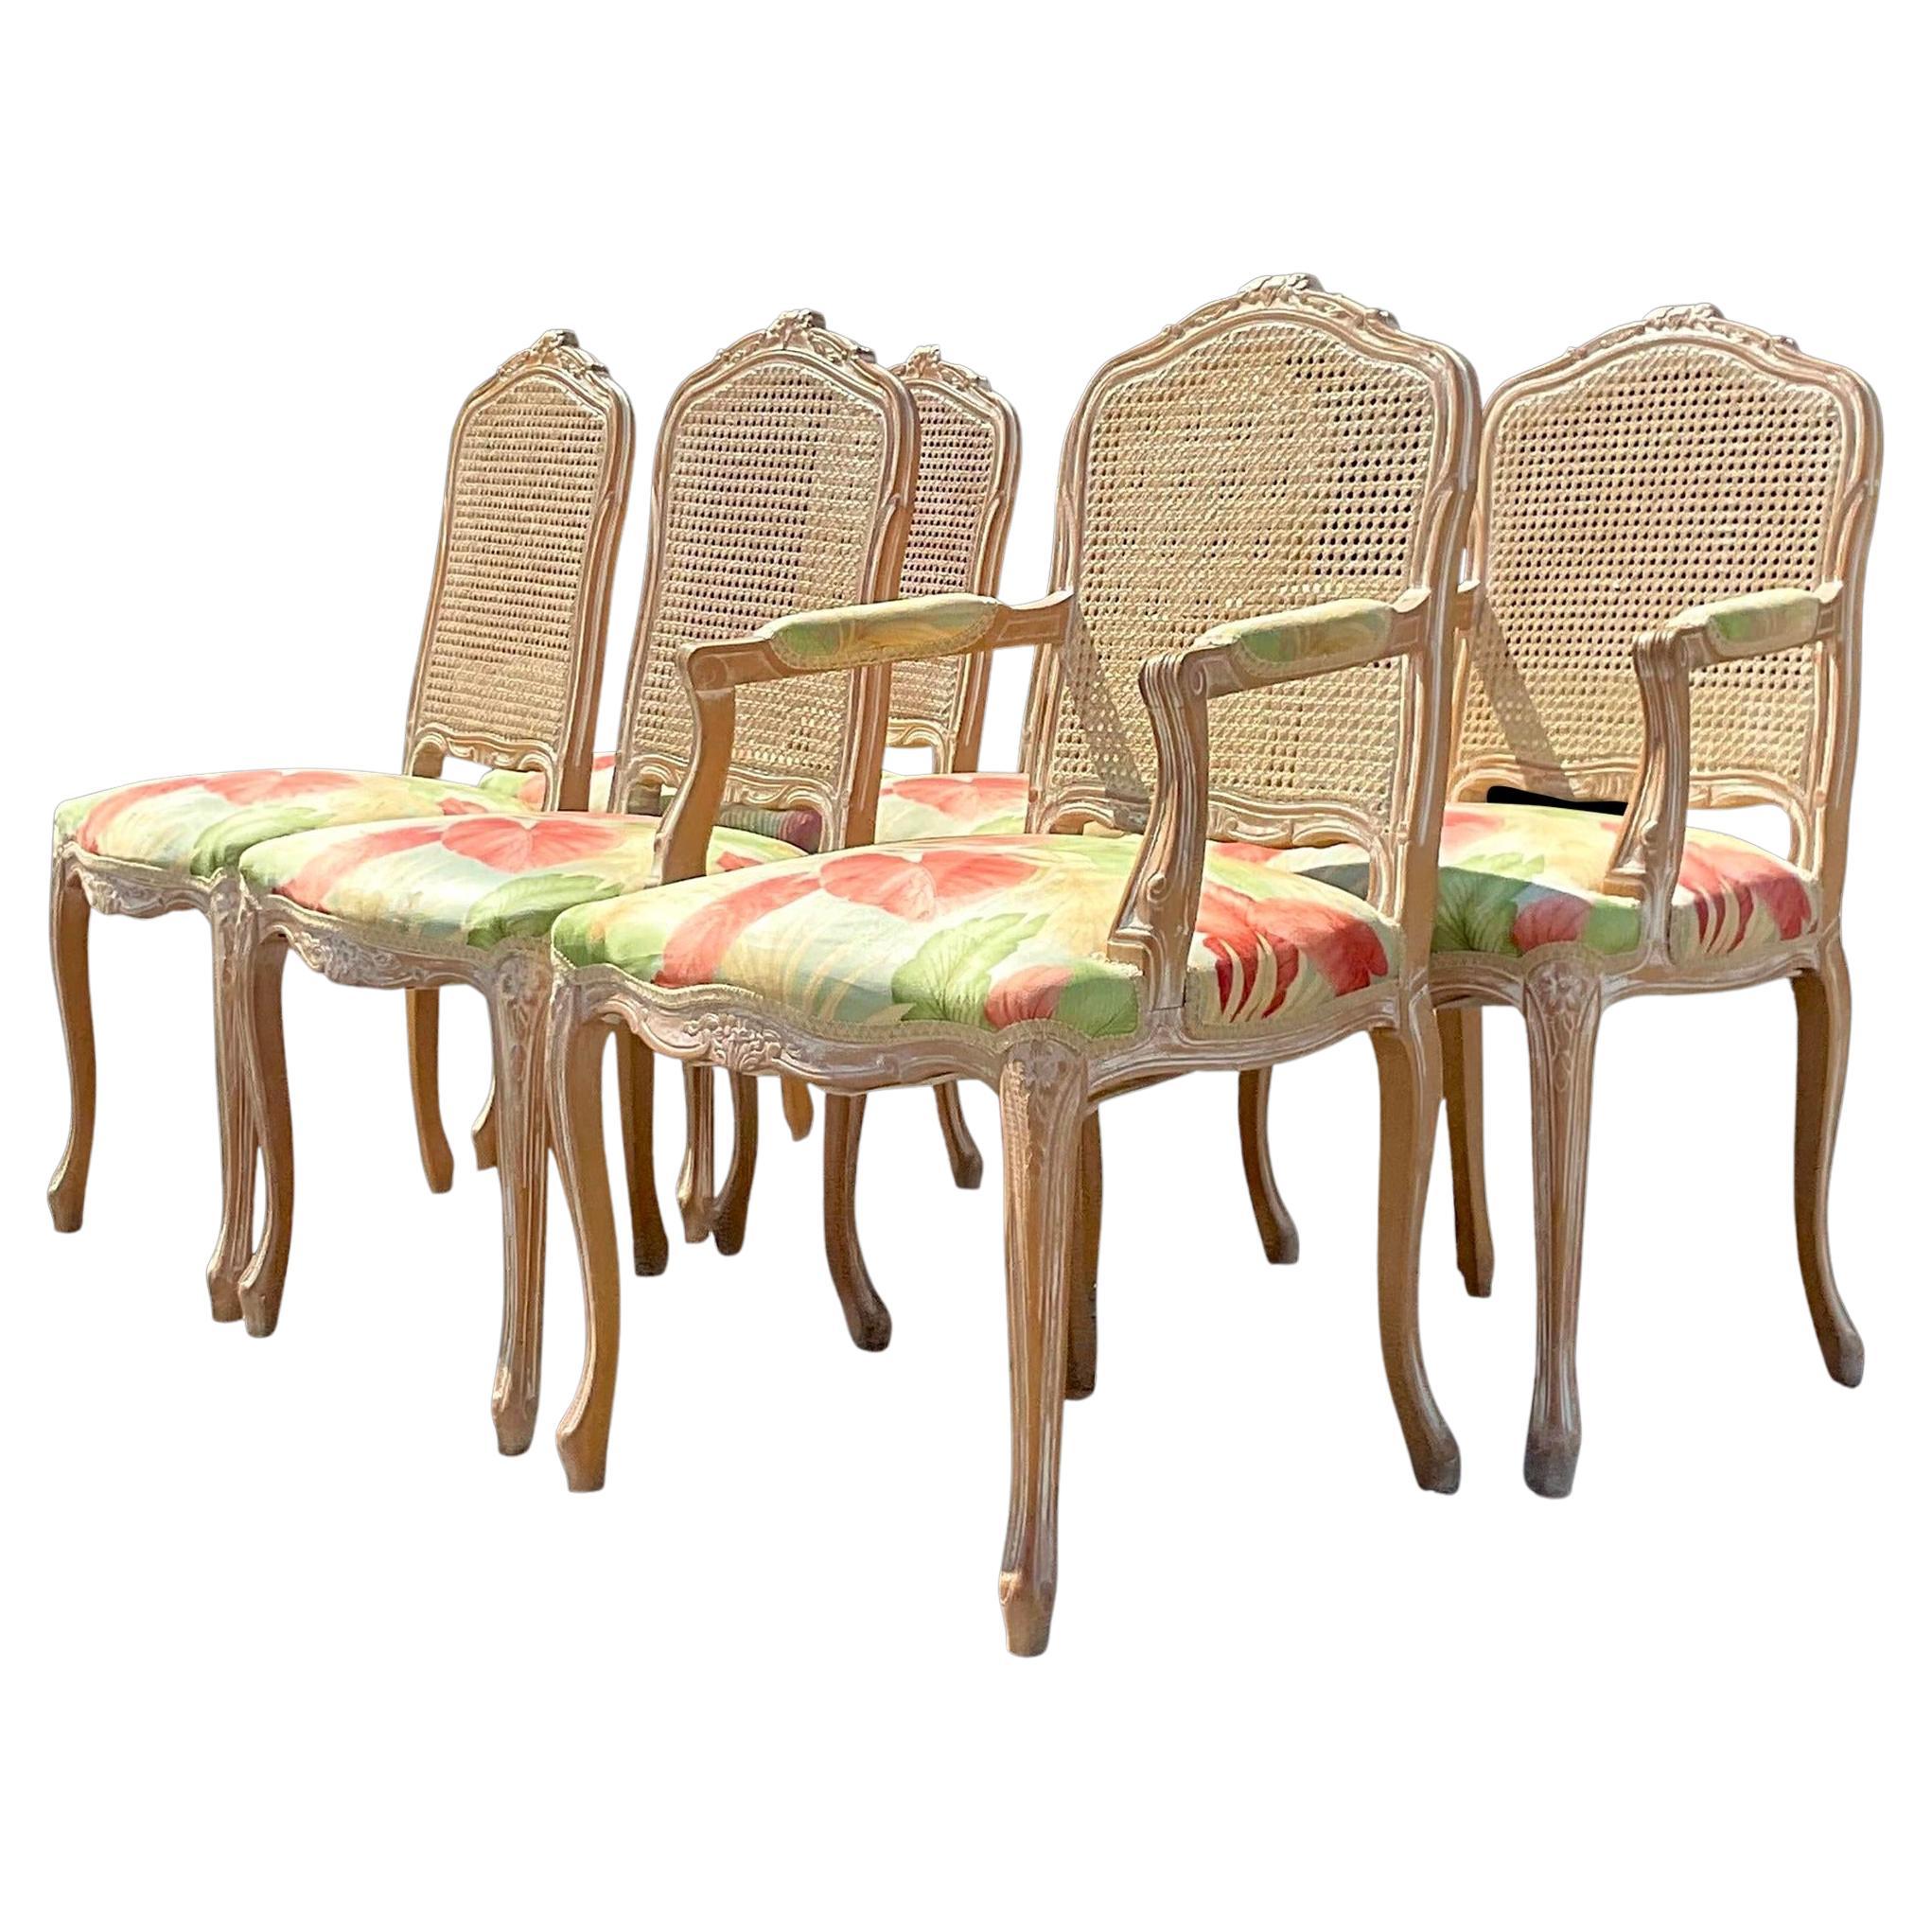 Vintage Regency Cerused Cane Bergere Dining Chairs - Set of 6